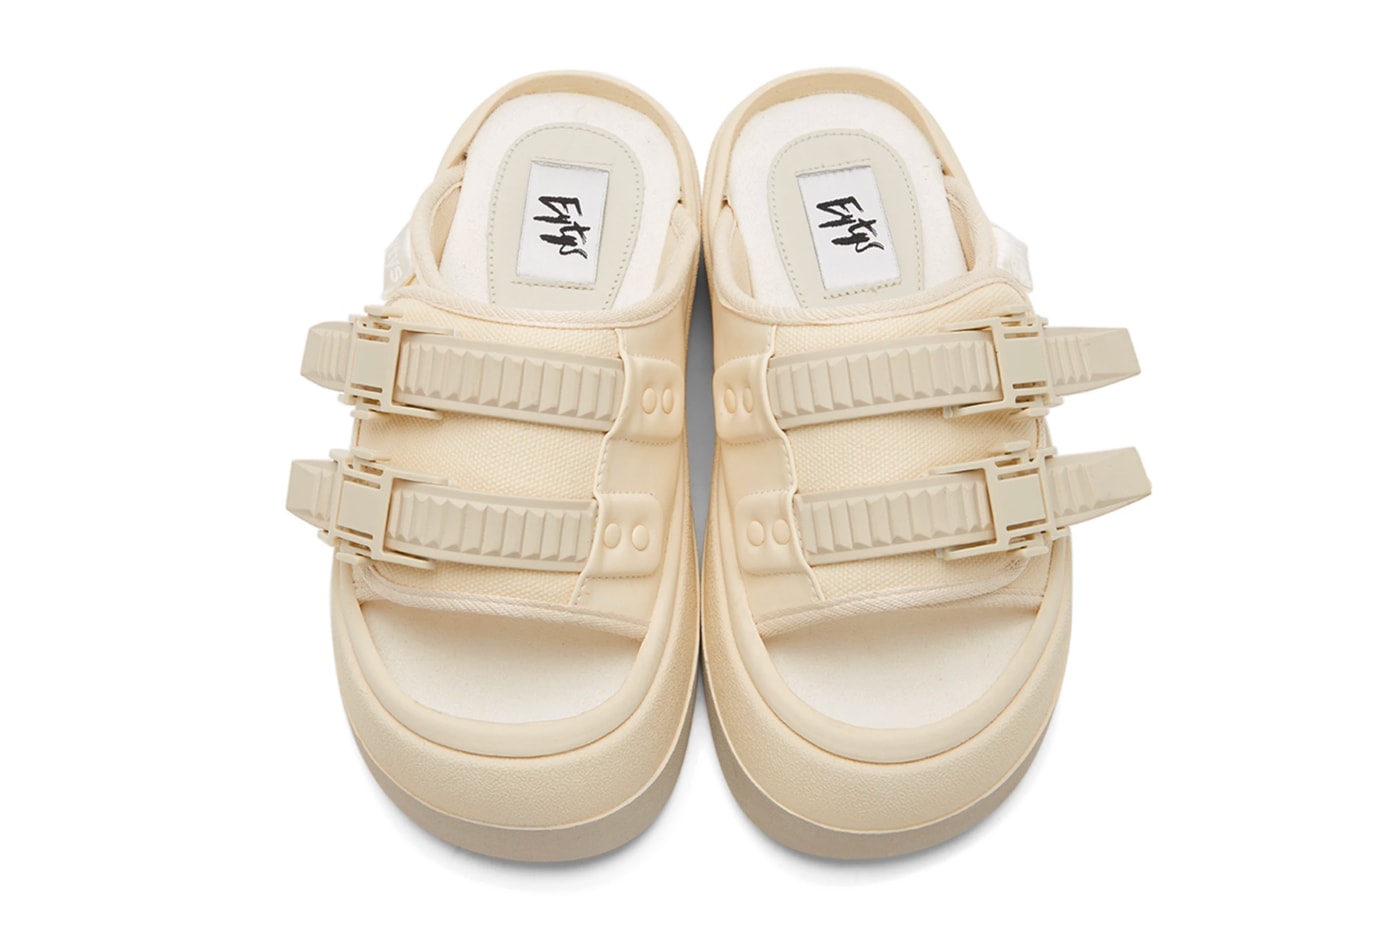 Eytys Capri Sandals Off White Black release Buffed canvas twill faux leather slip on Open round toe Treaded rubber sole